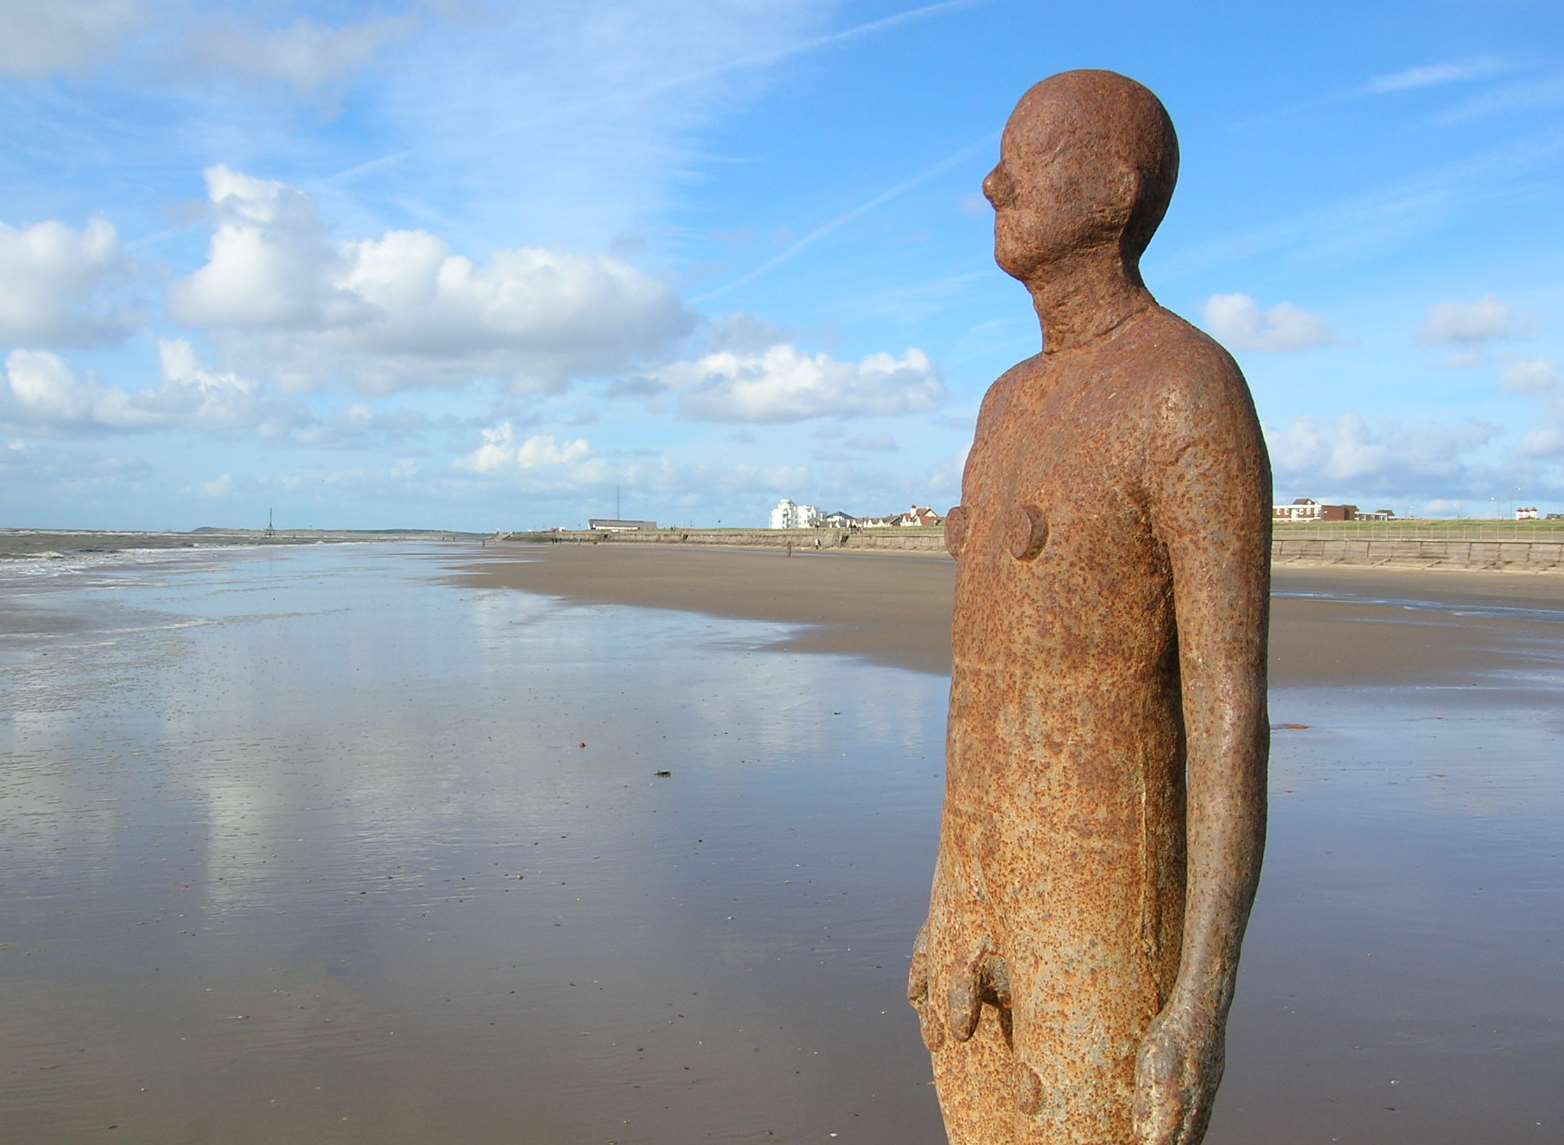 Another Time, on Crosby Beach near Liverpool is a cast iron figure of a man which is set to be recreated in Folkestone